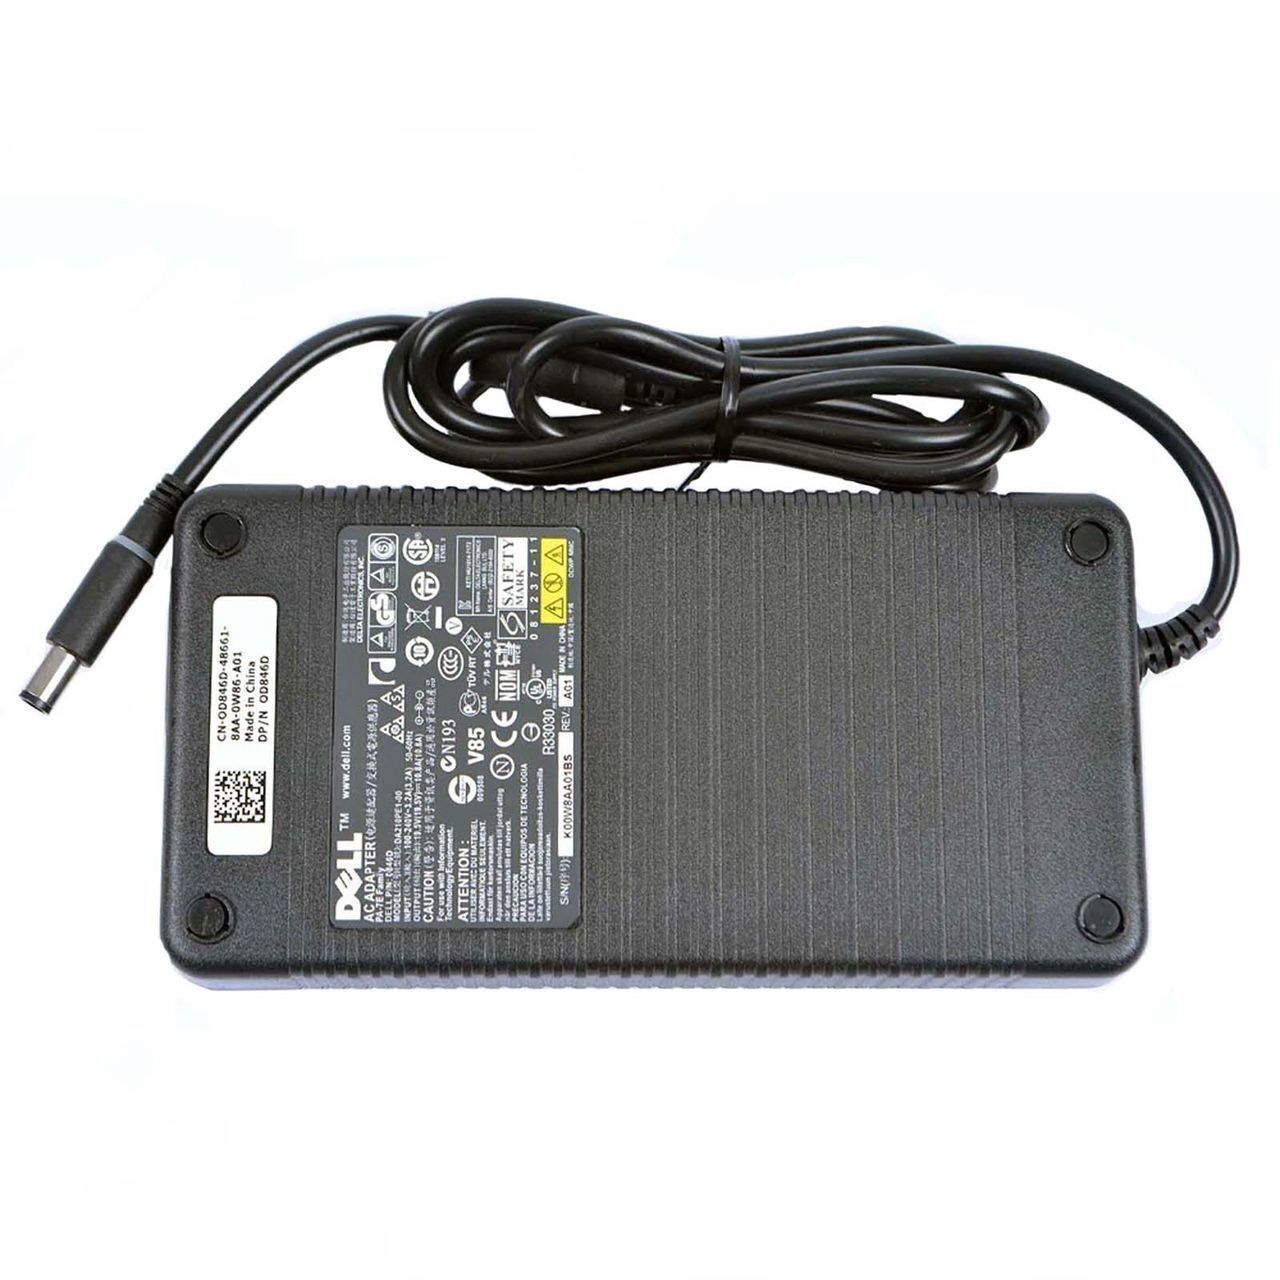 DELL Precision M6500 PP08X 210W Genuine Original AC Power Adapter Charger